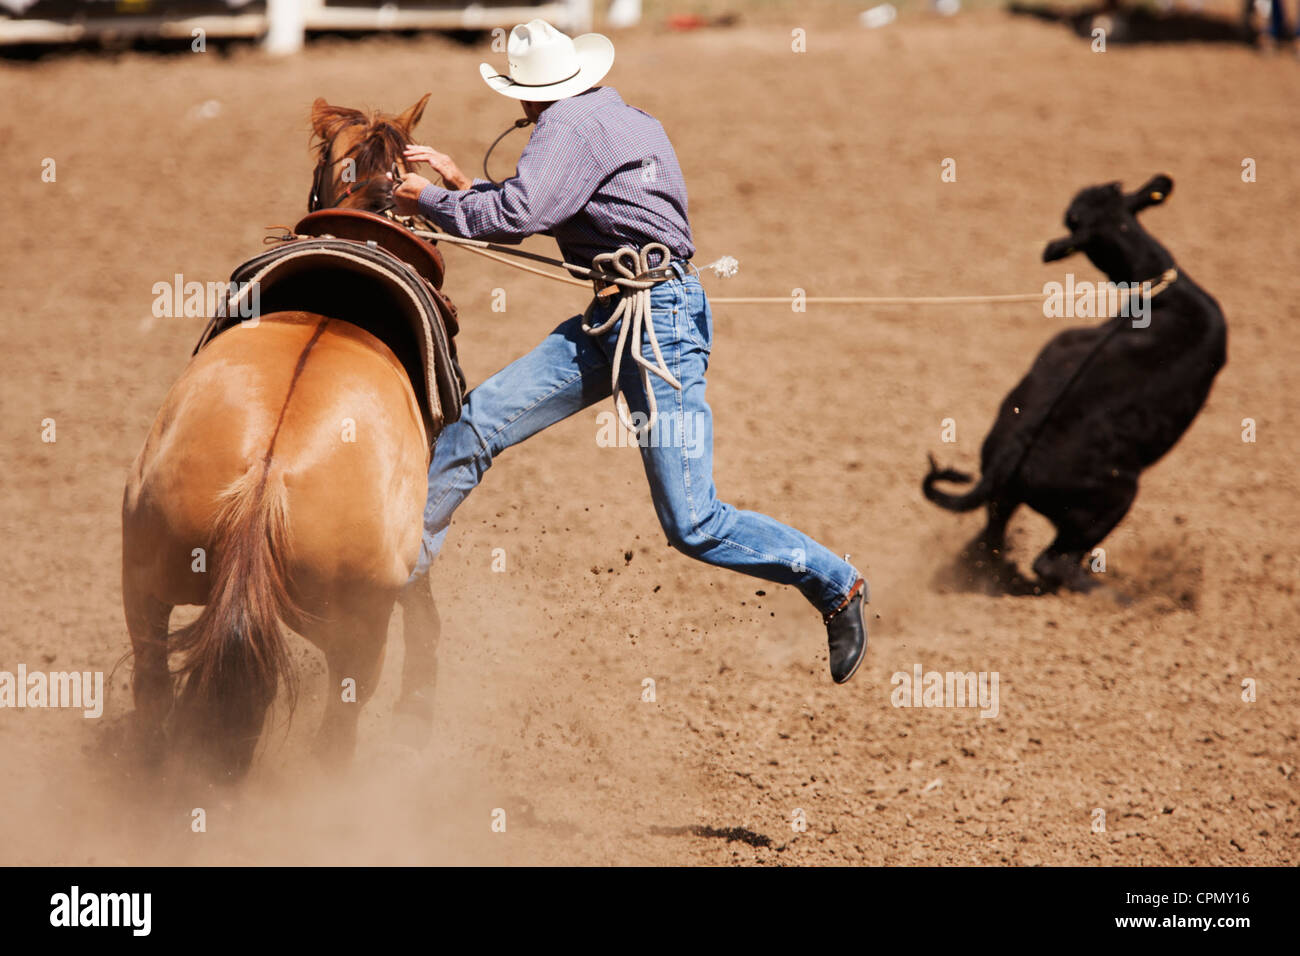 A competitor in the tie down roping competition lassos a calf at the 90th annual Black Hills Roundup rodeo in Belle Fourche, SD. Stock Photo